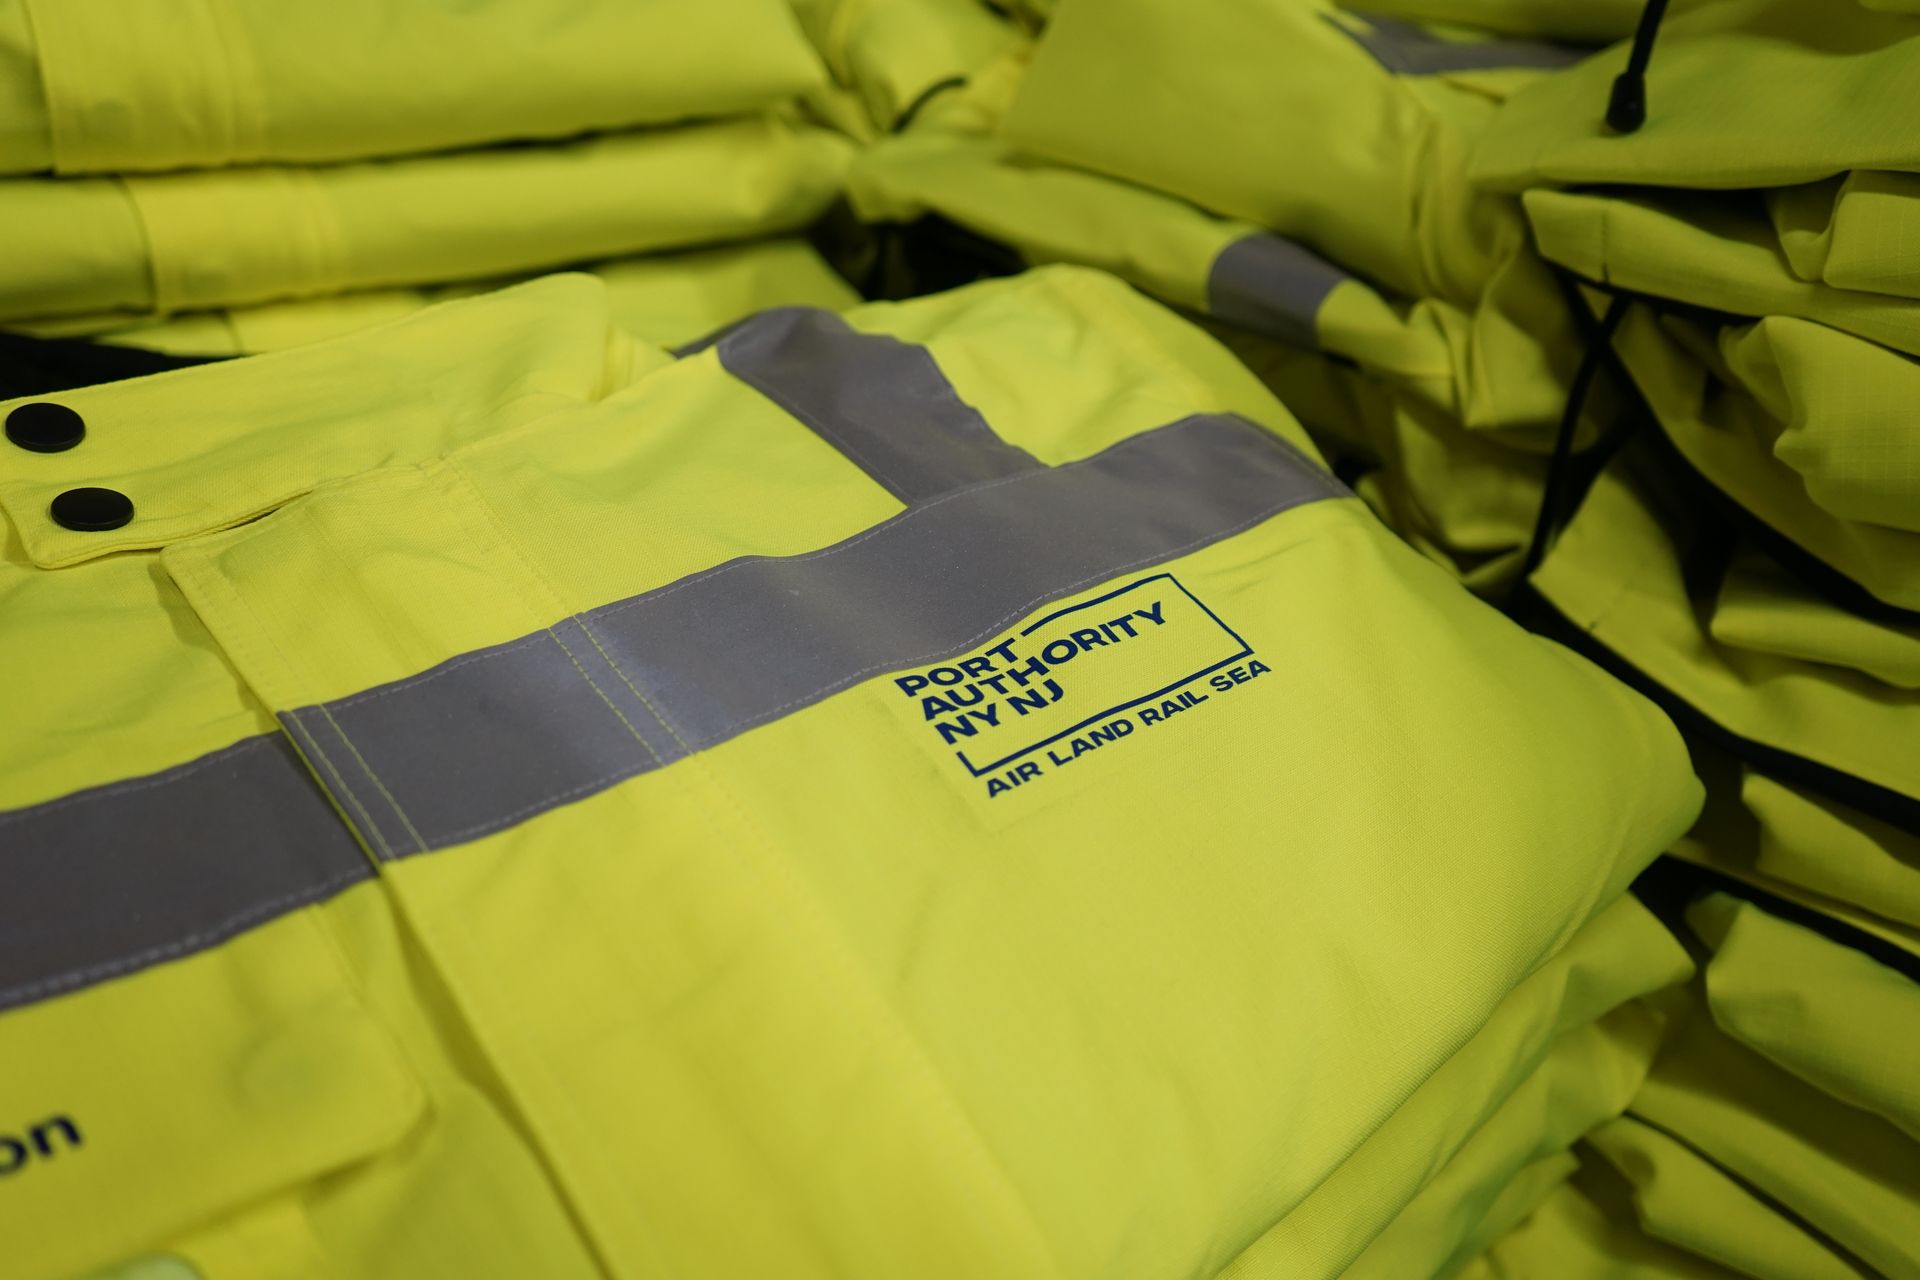  close-up view of high-visibility safety vests featuring the 'Port Authority NYNJ' logo in bold text. The vibrant neon yellow vests, underscored with reflective silver stripes for enhanced visibility, are designed for optimal safety in various transport settings including air, land, and sea operations.